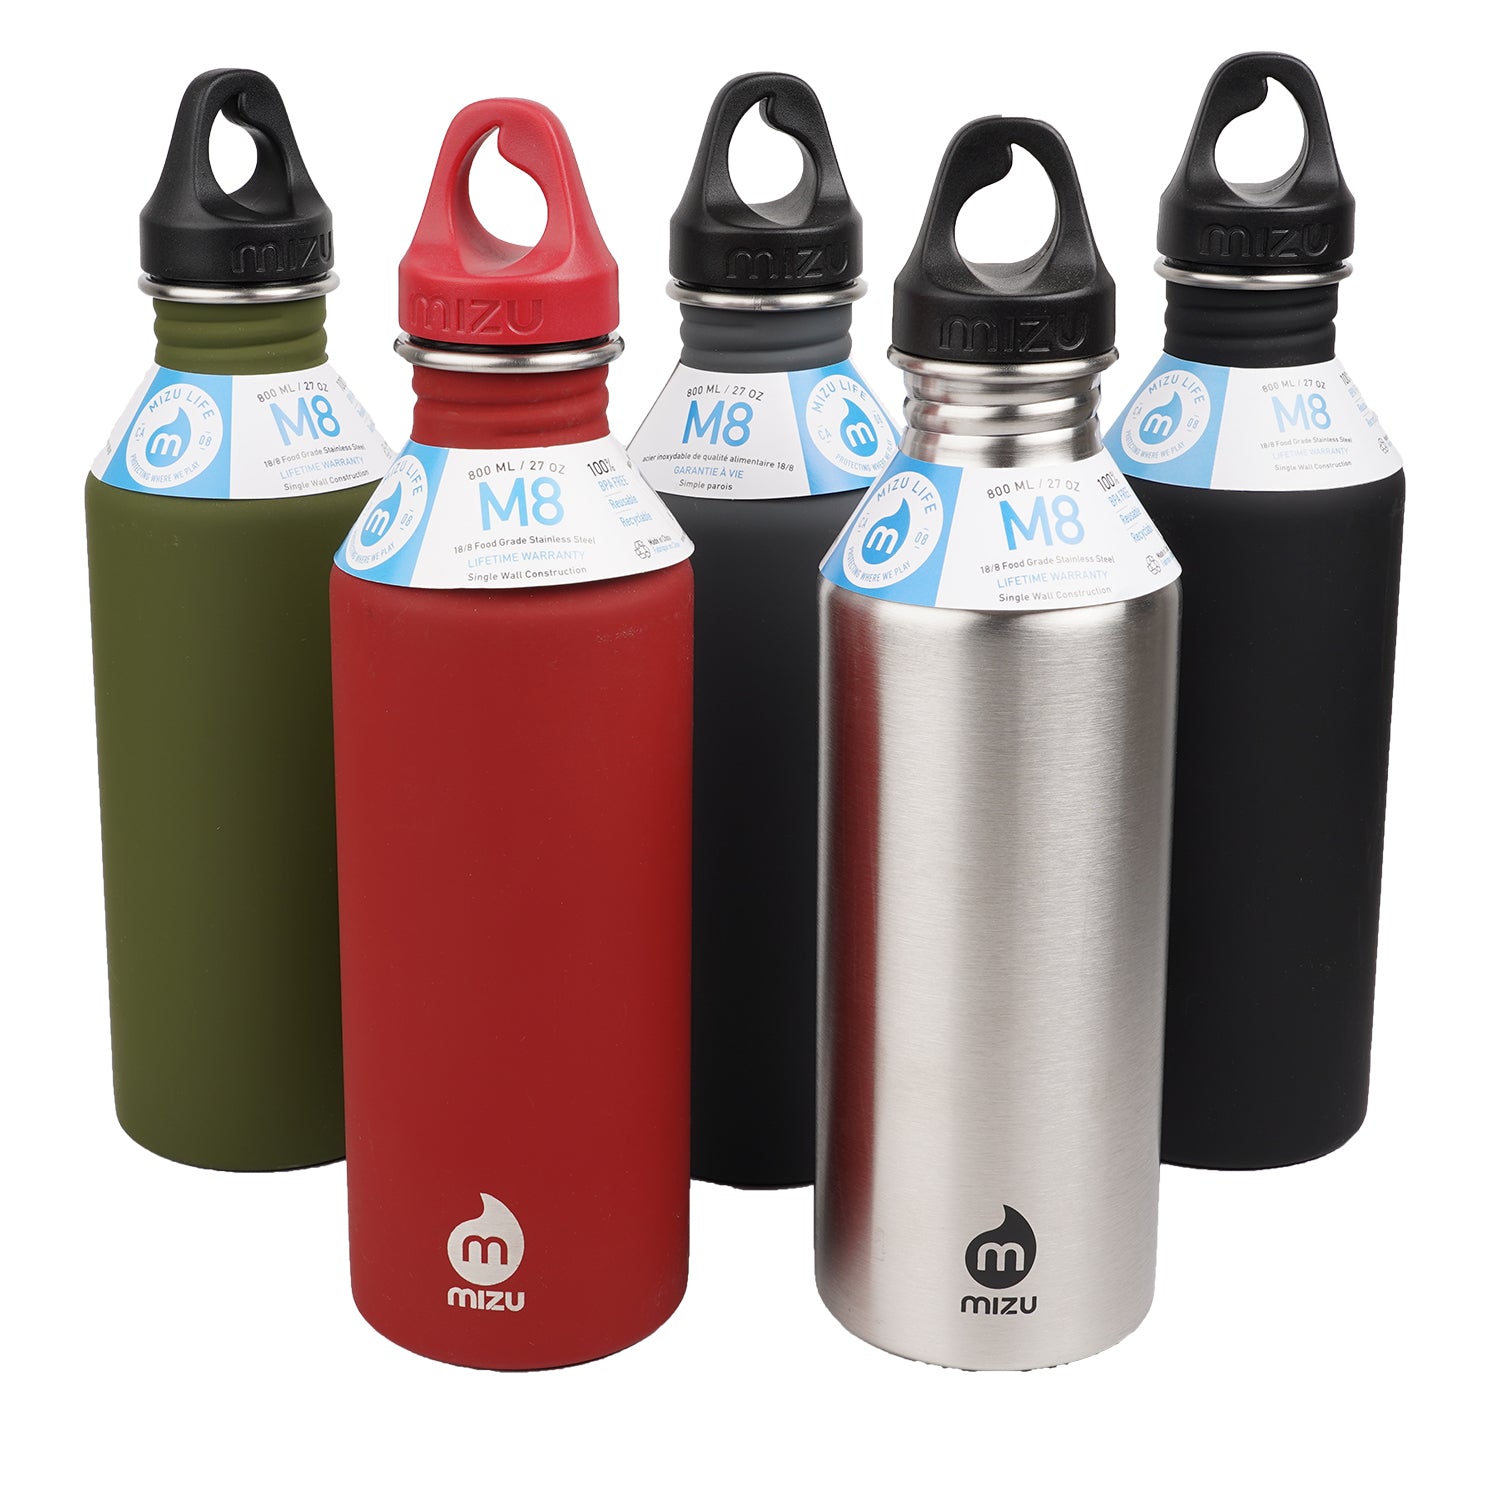 800 ml single wall stainless steel bottle with a black loop cap.  The M8 stainless steel bottle from Mizu has the perfect size and will fit perfect in your car or in your sports bag.